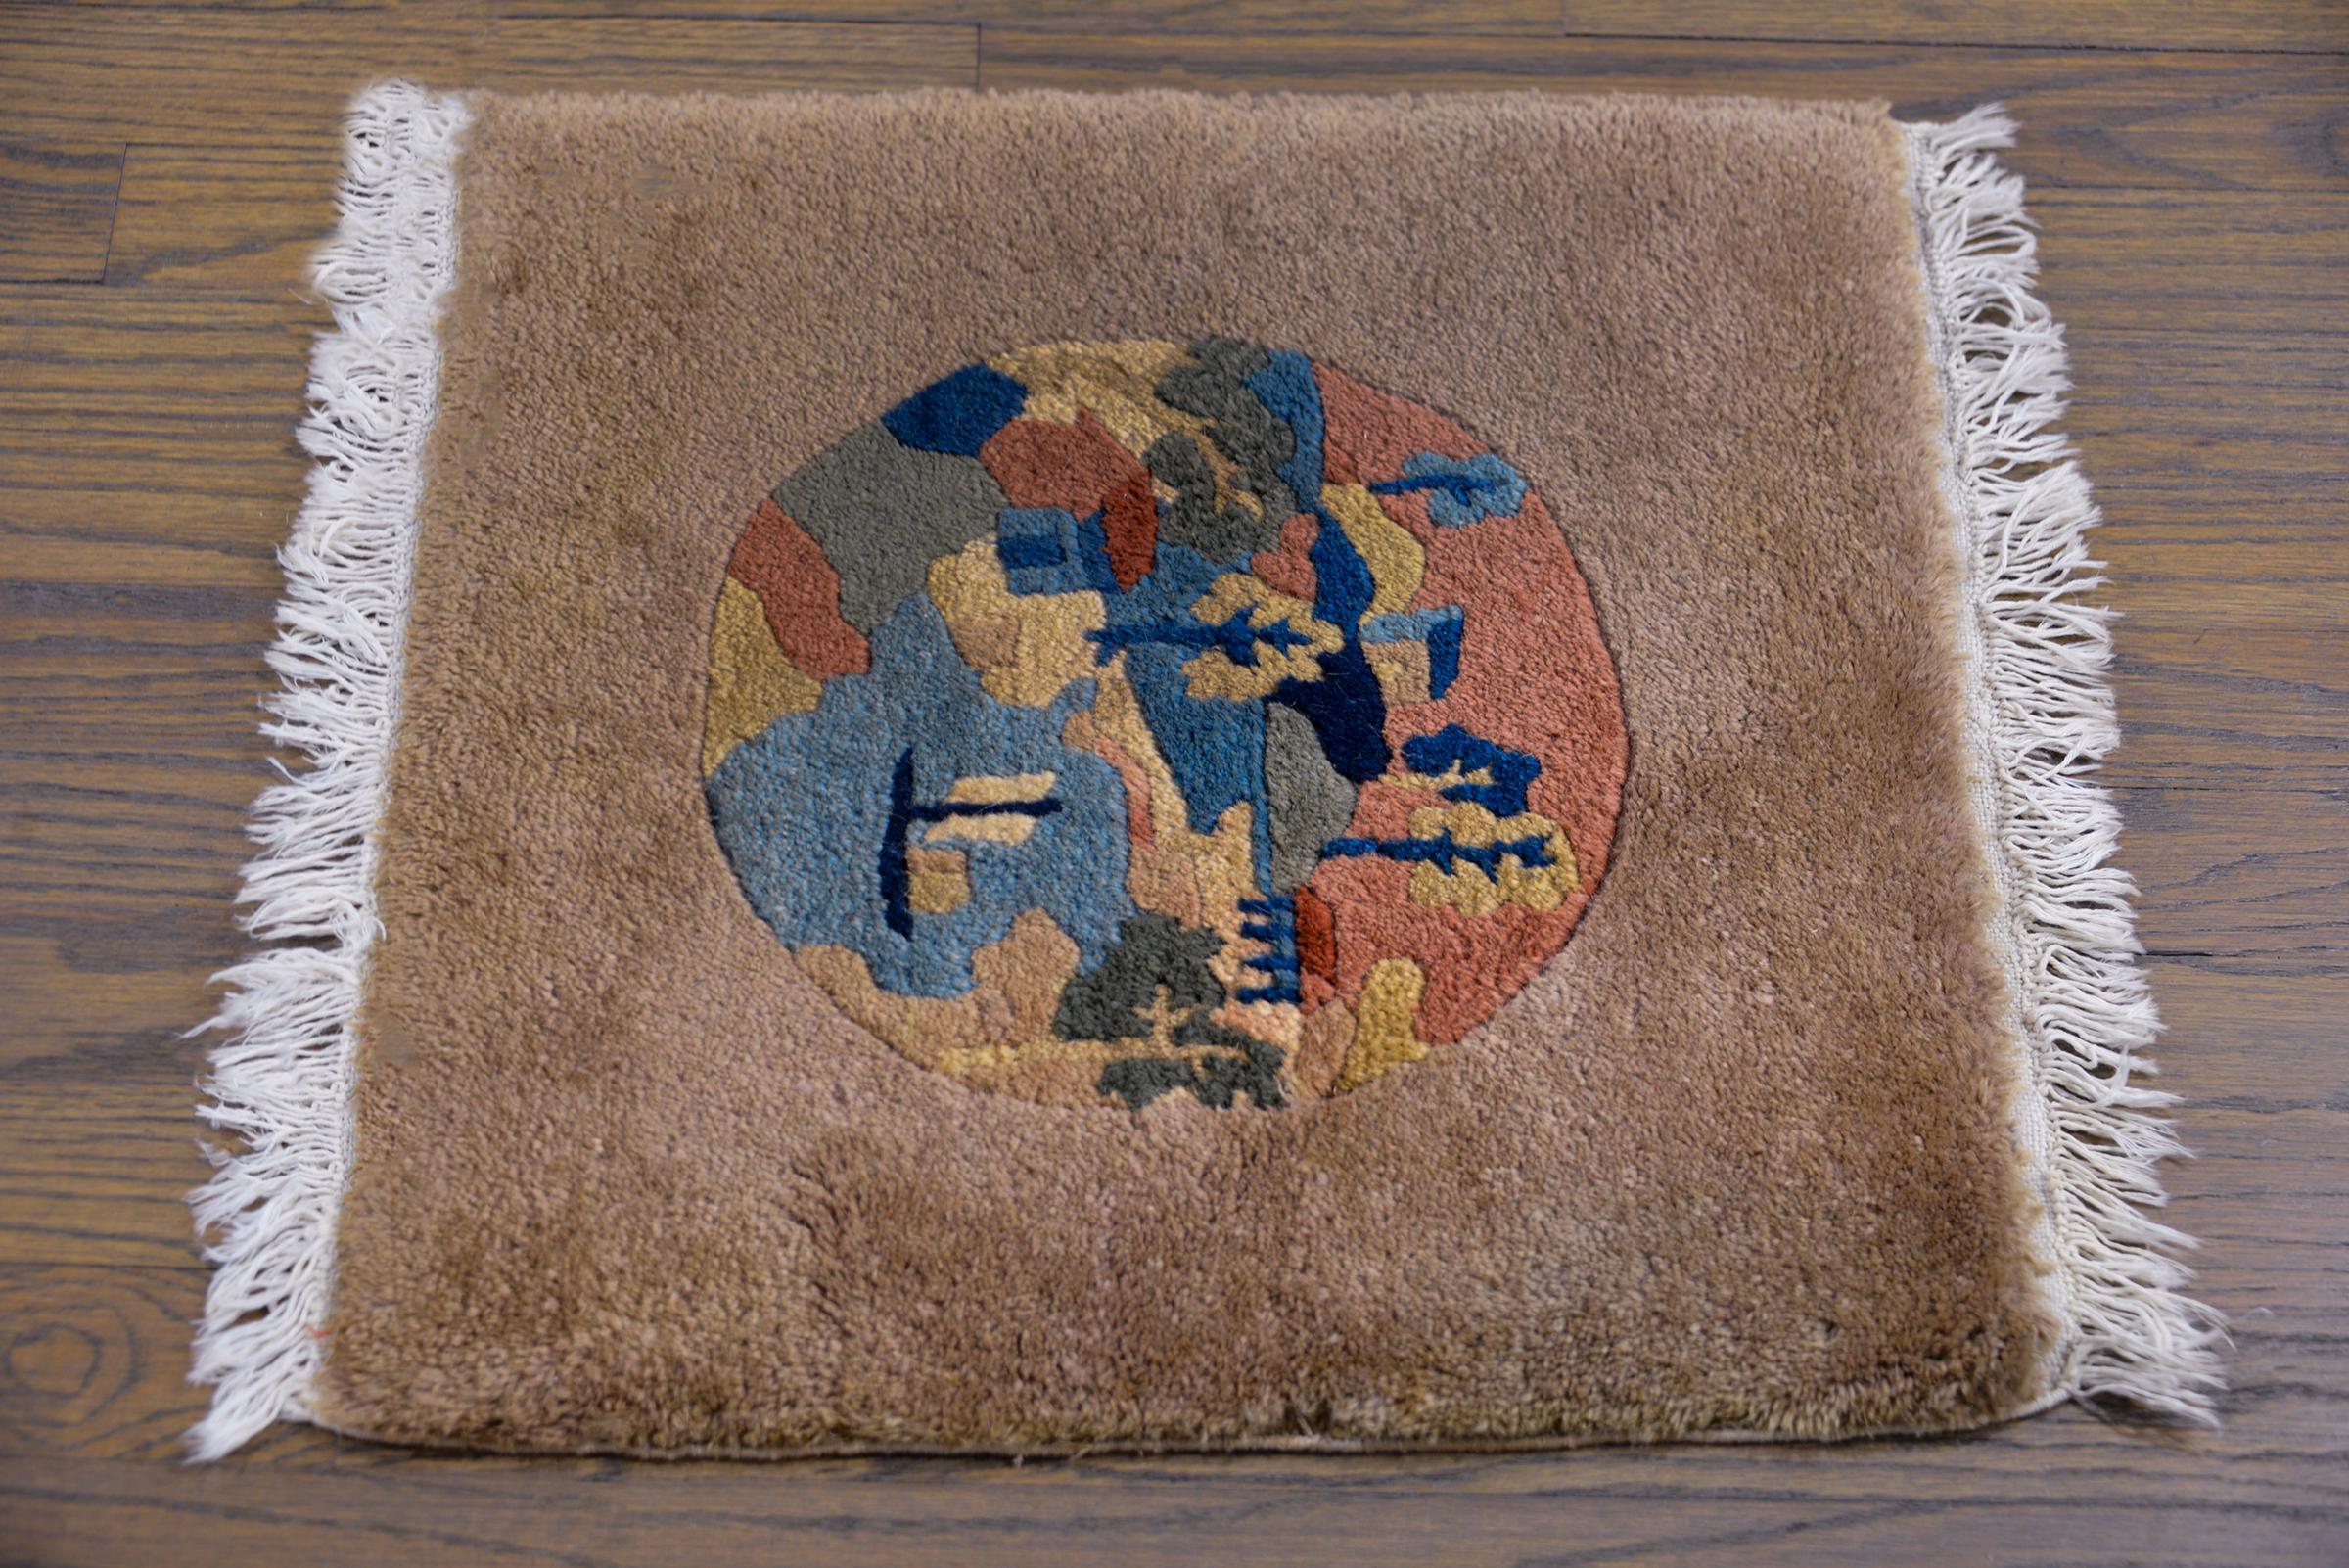 A charming early 20th century Chinese Art Deco rug with a central round medallion with a landscape containing houses surrounding a lake with a boat, and all surrounded by a wide camel colored border.